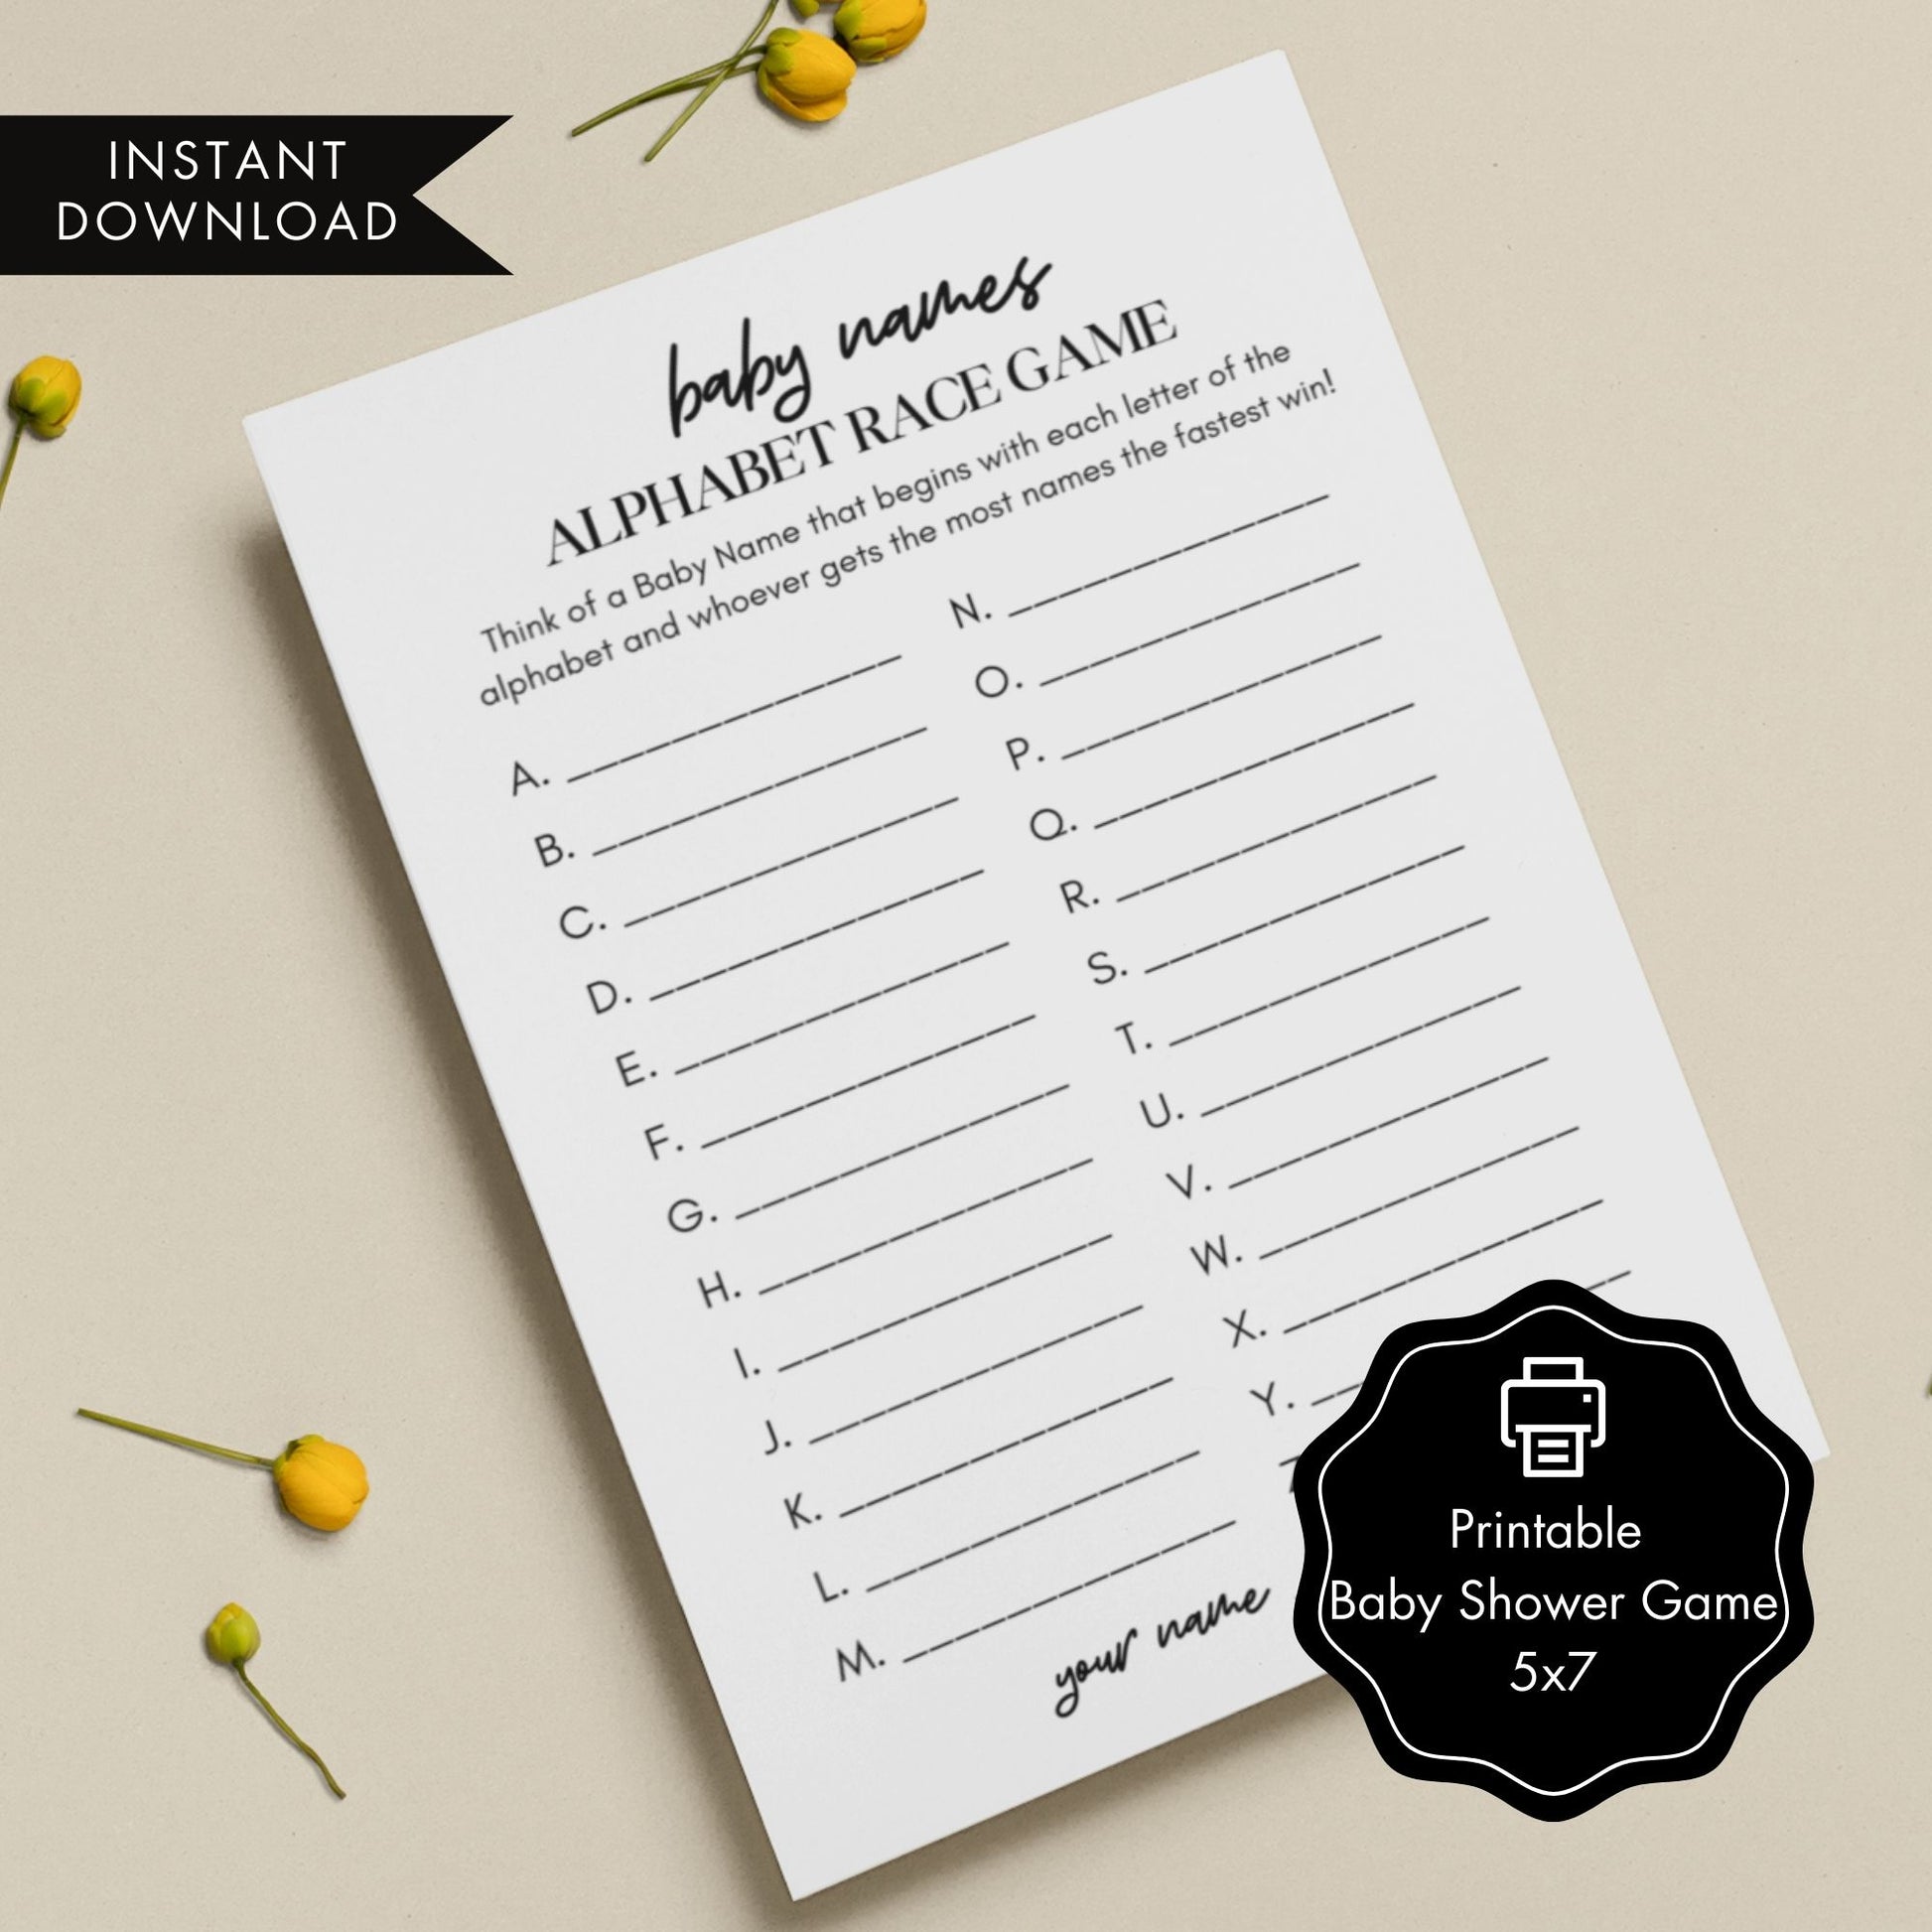 Baby Shower Printable Games - Alphabet Race Game 5x7